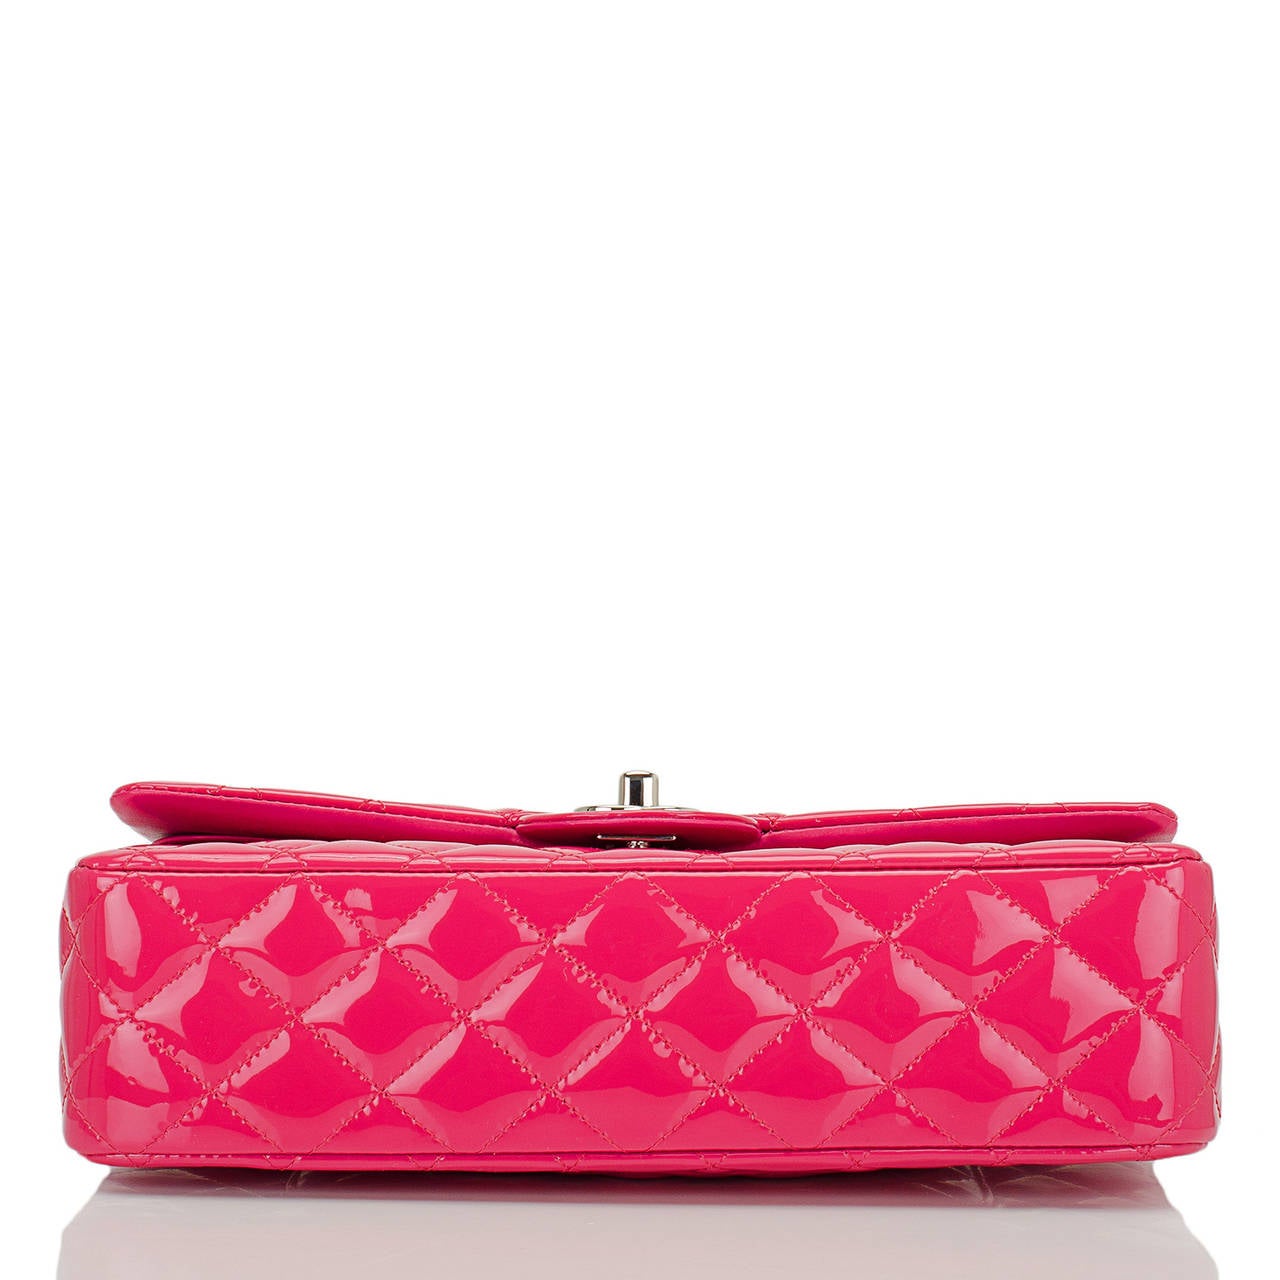 Chanel Pink Quilted Patent Medium Classic Double Flap Bag NEW at ...